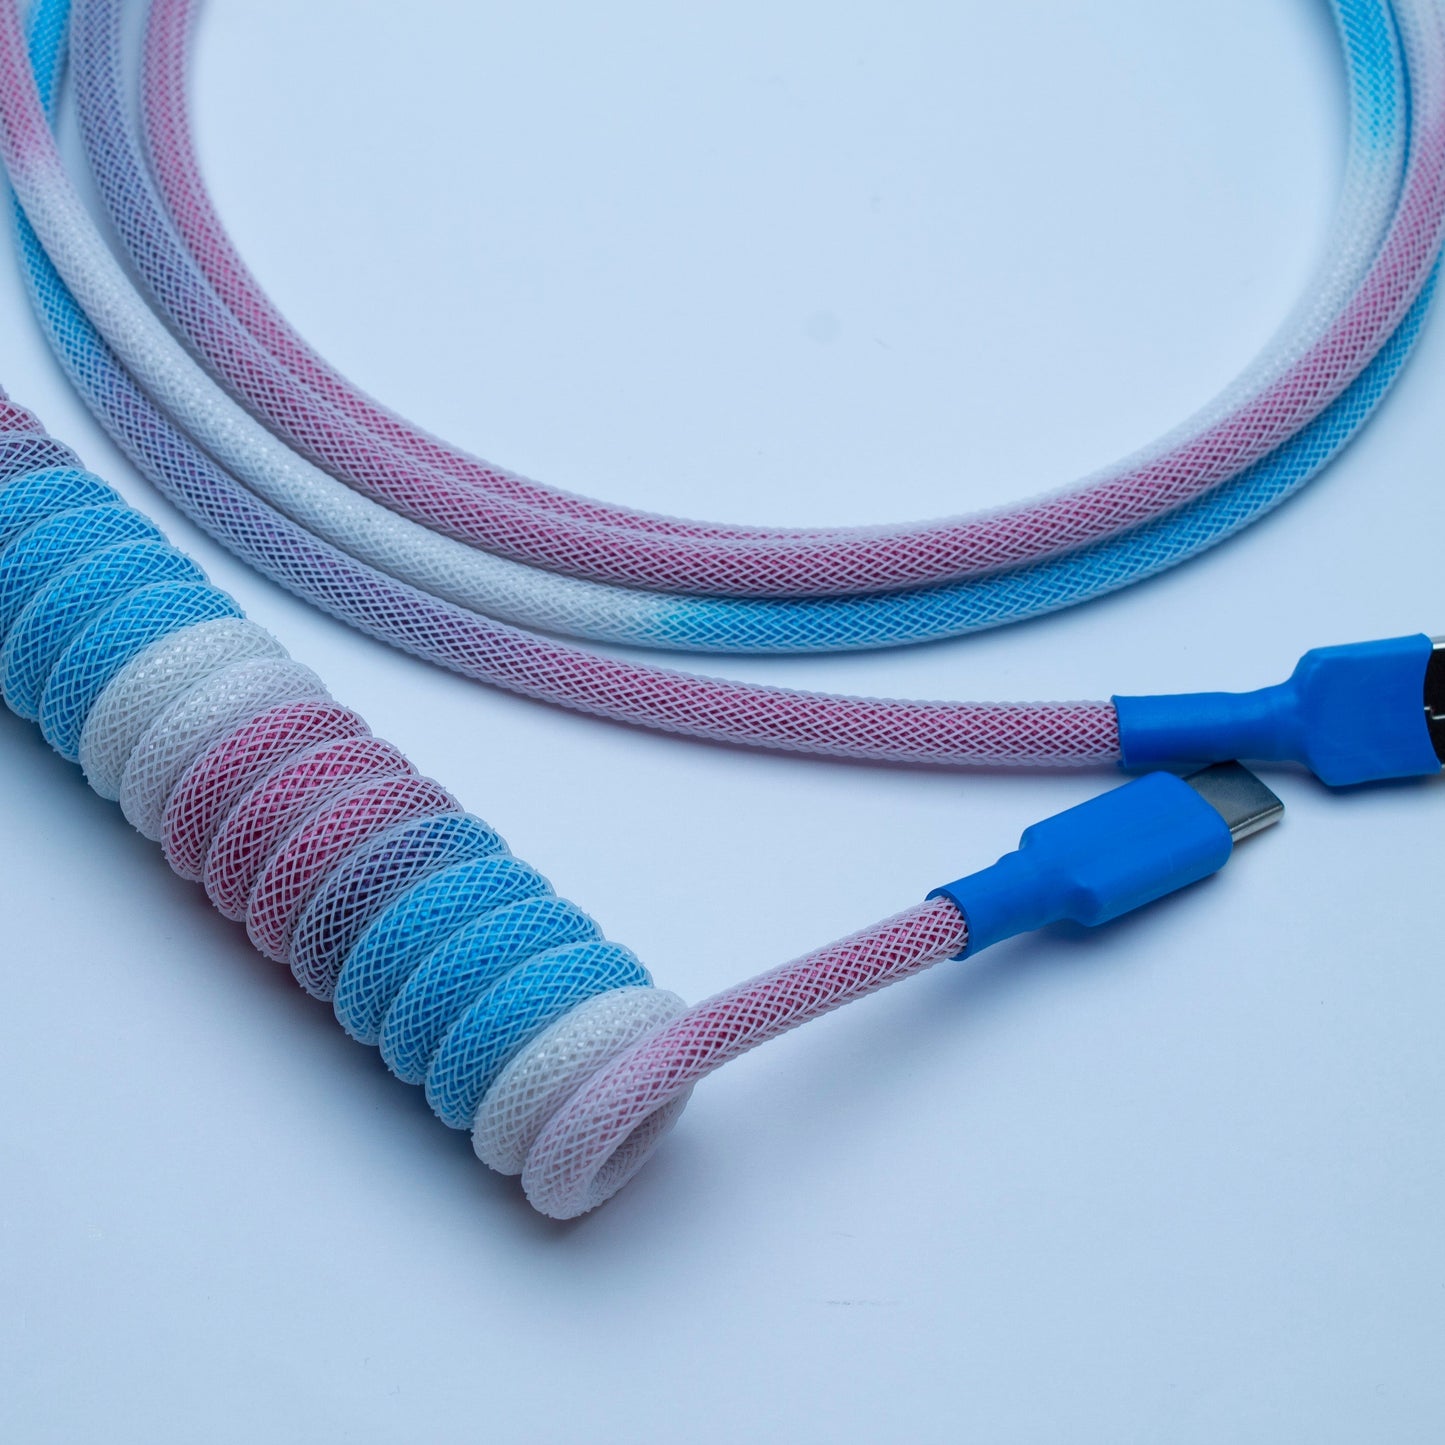 [FEMO] USB Cables